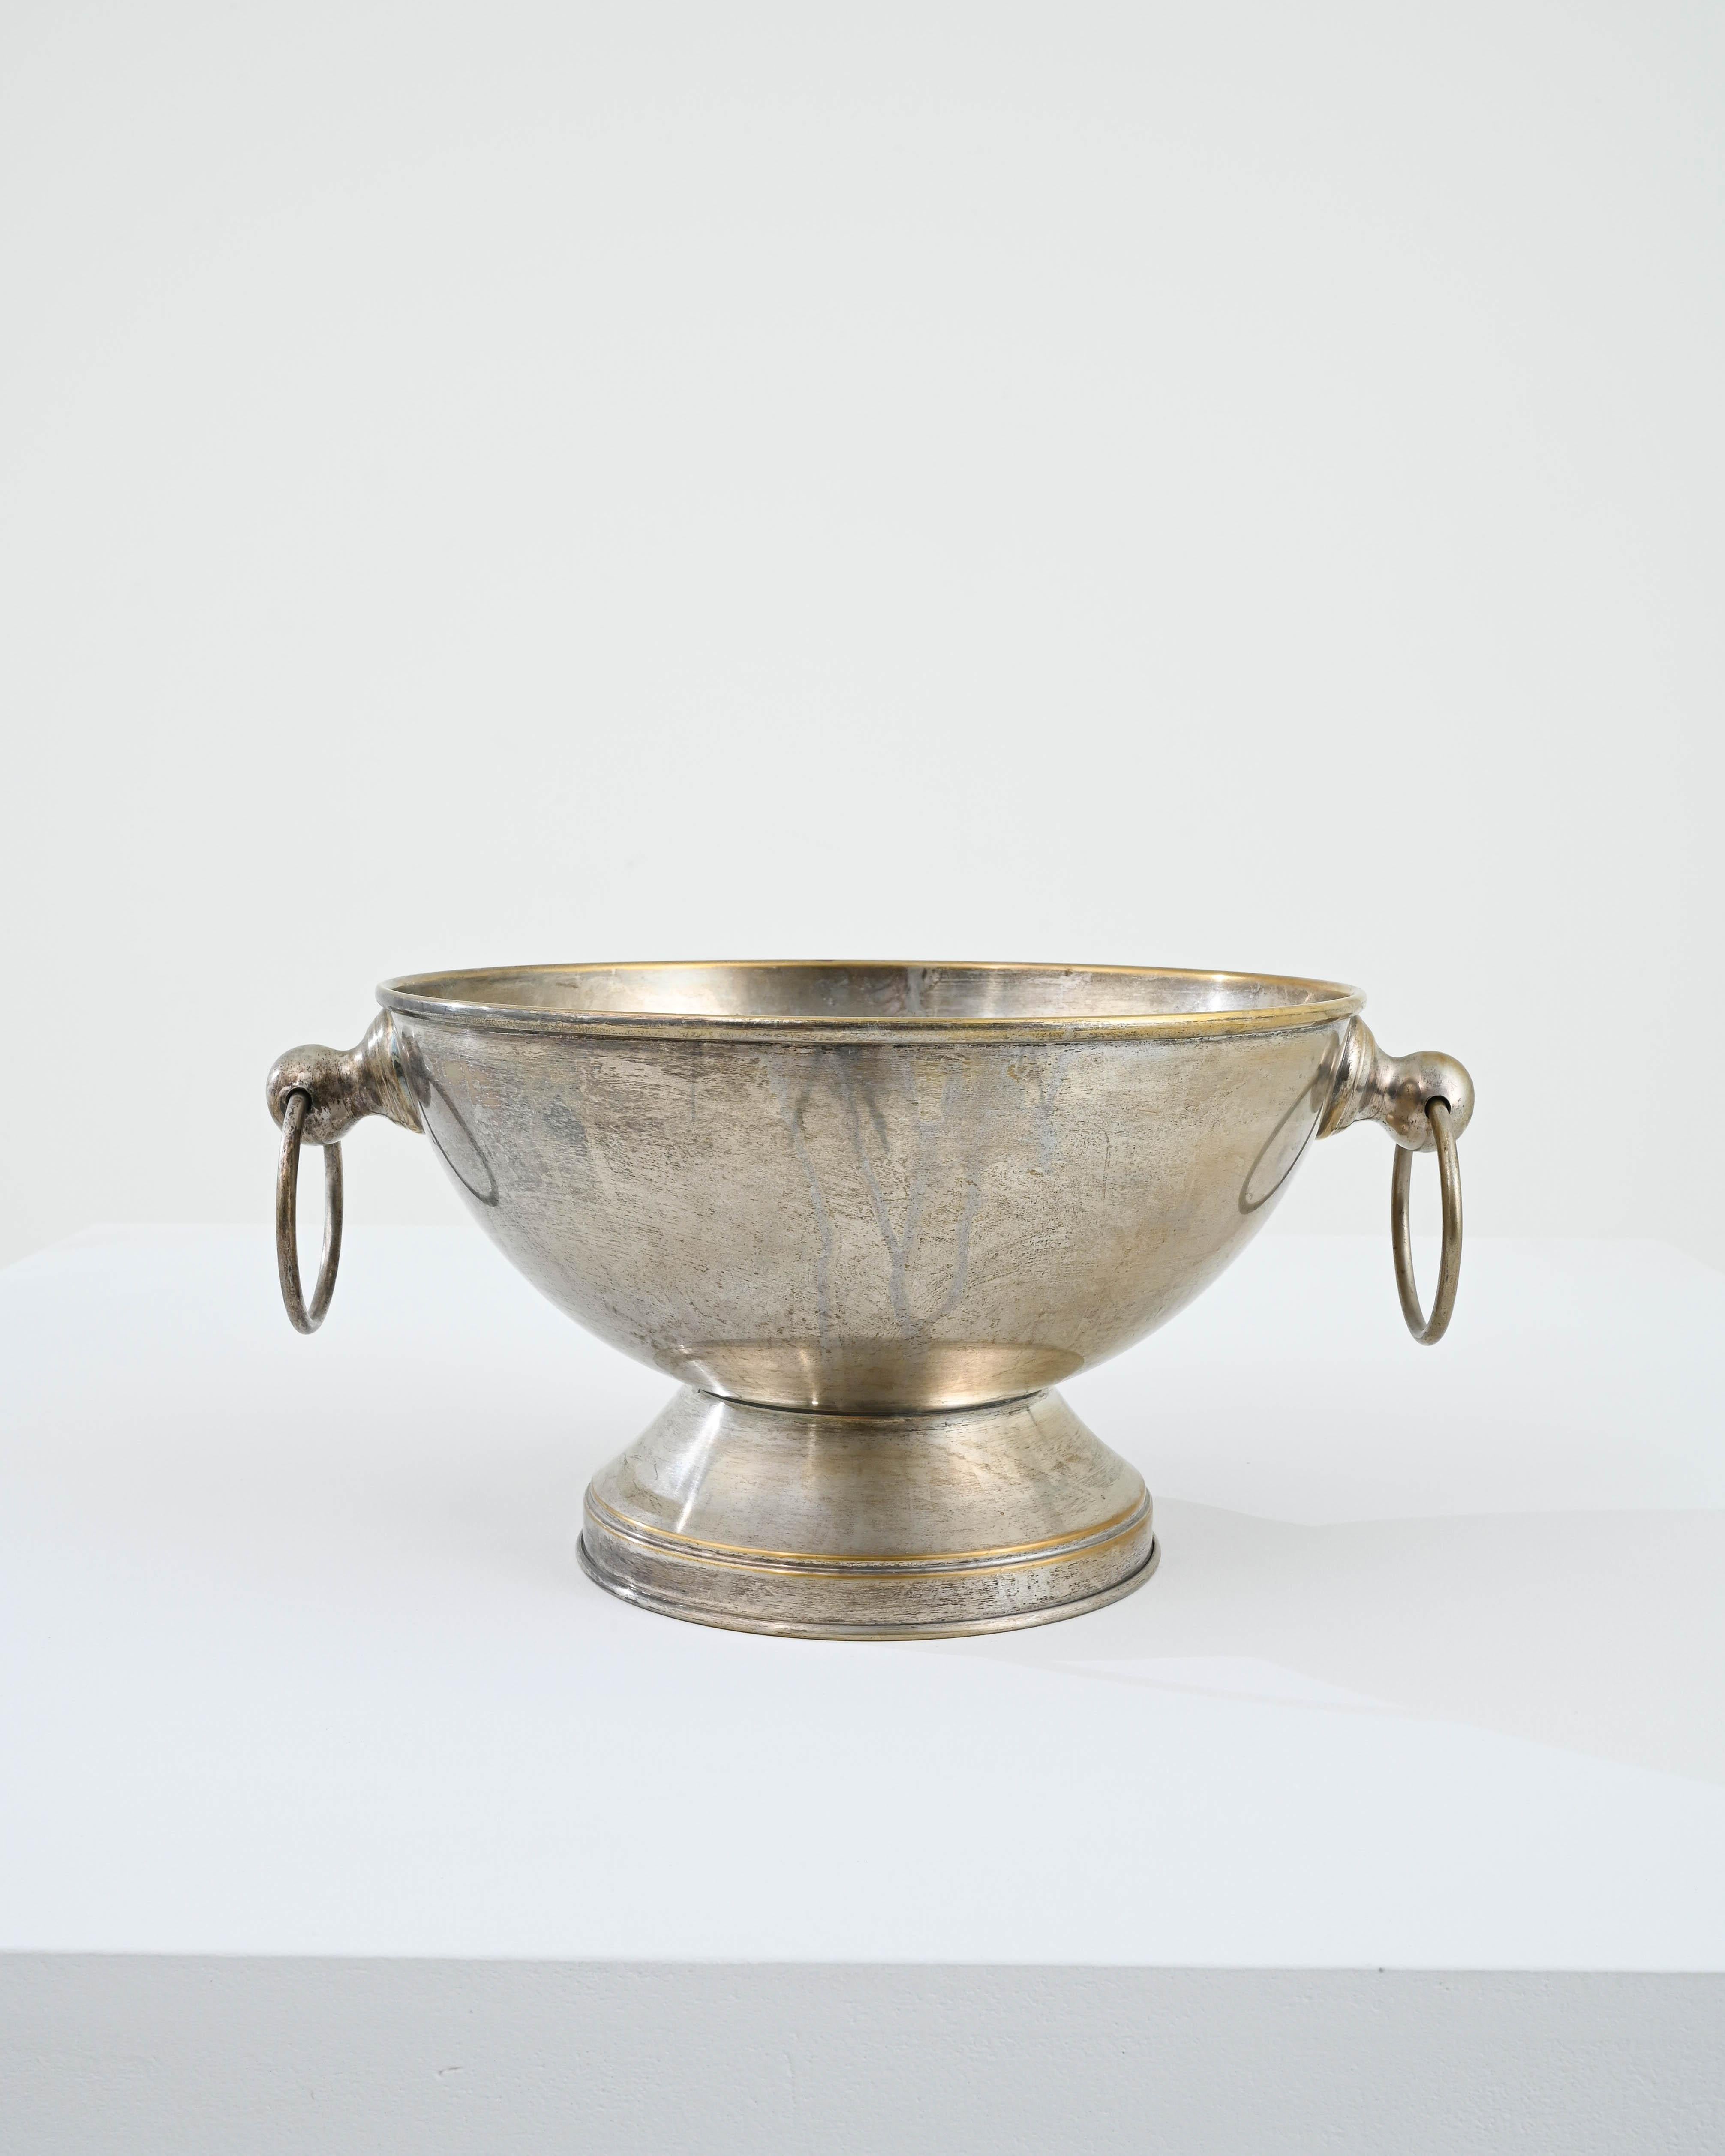 A brass bowl from early 20th Century France. A broad cup shape elevated on a low pedestal, the exterior surface has developed a captivating patina, muted golden brass melding with silver shine. The patinated finish, smoothed and tarnished, adds to